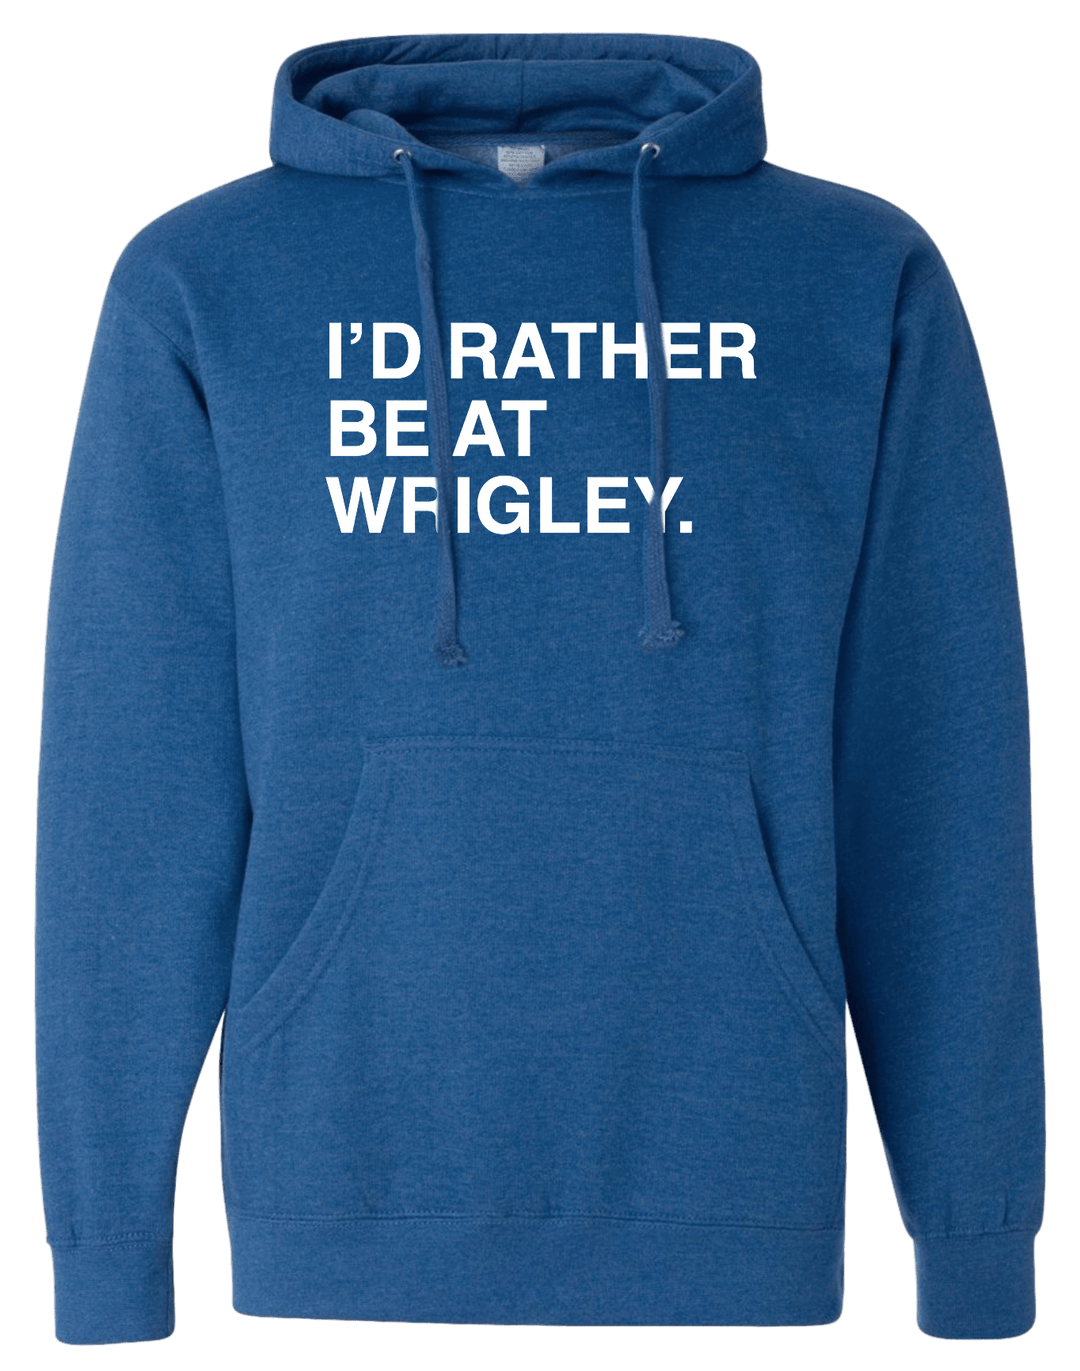 I'D RATHER BE AT WRIGLEY. (HOODIE) - OBVIOUS SHIRTS.